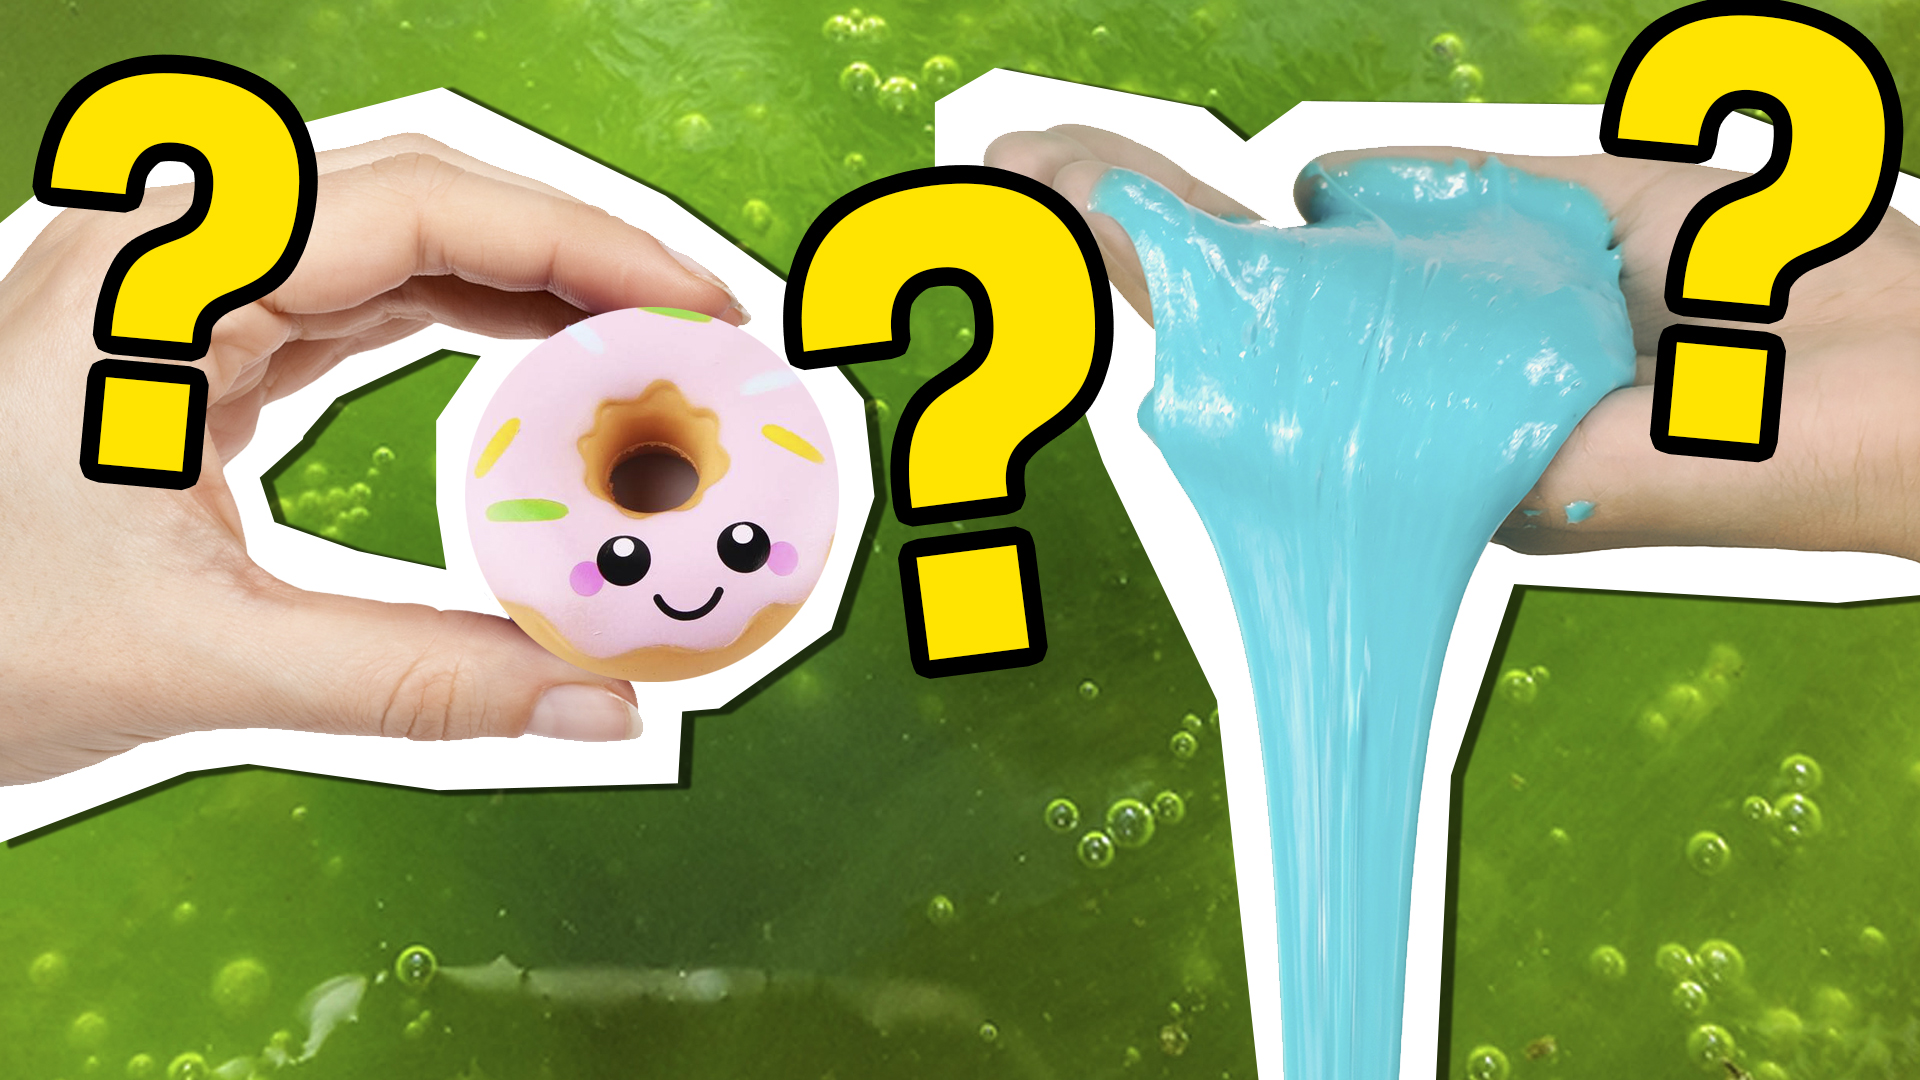 Squishy or slime personality quiz